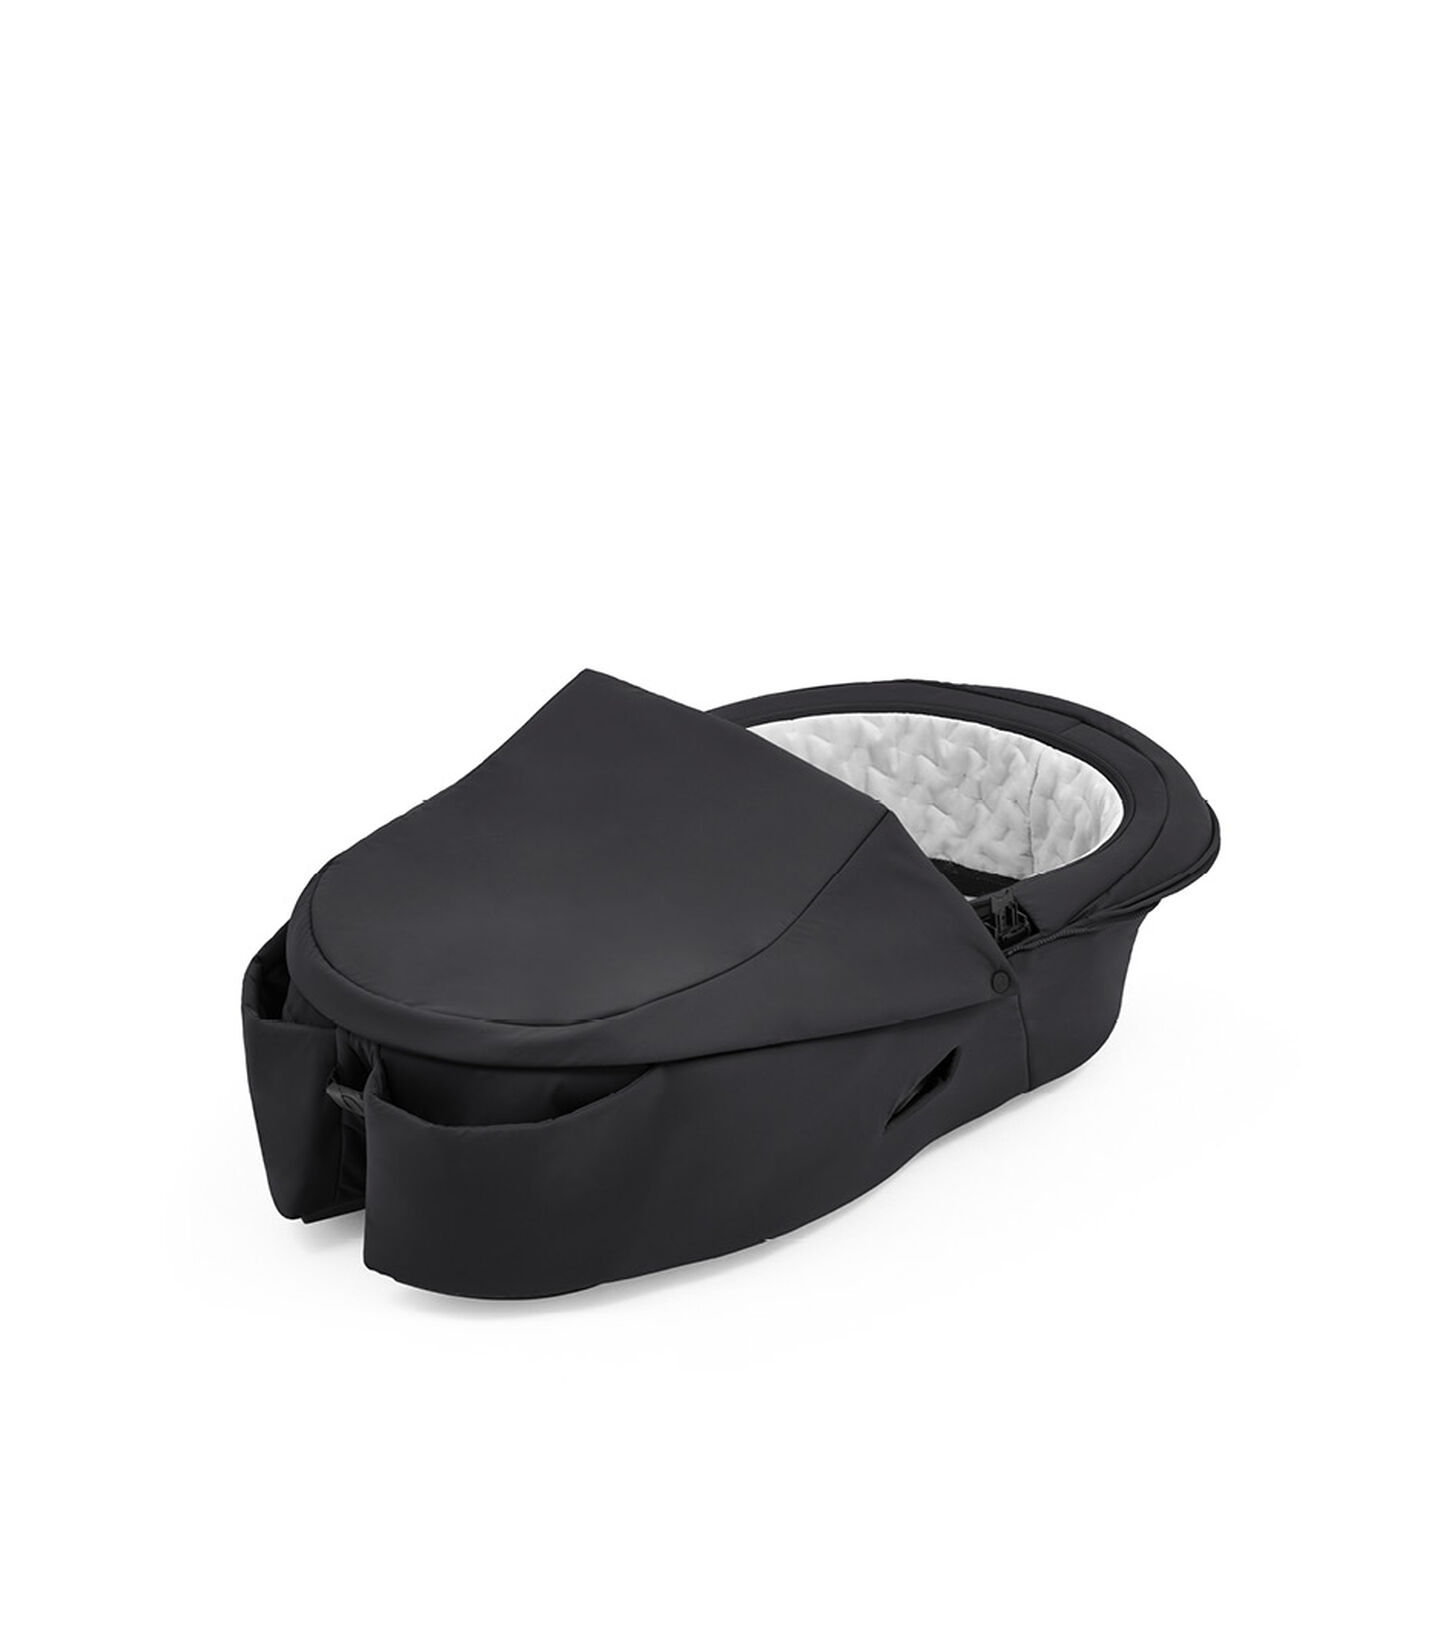 Stokke® Xplory® X Carry Cot Rich Black, 深黑色, mainview view 1